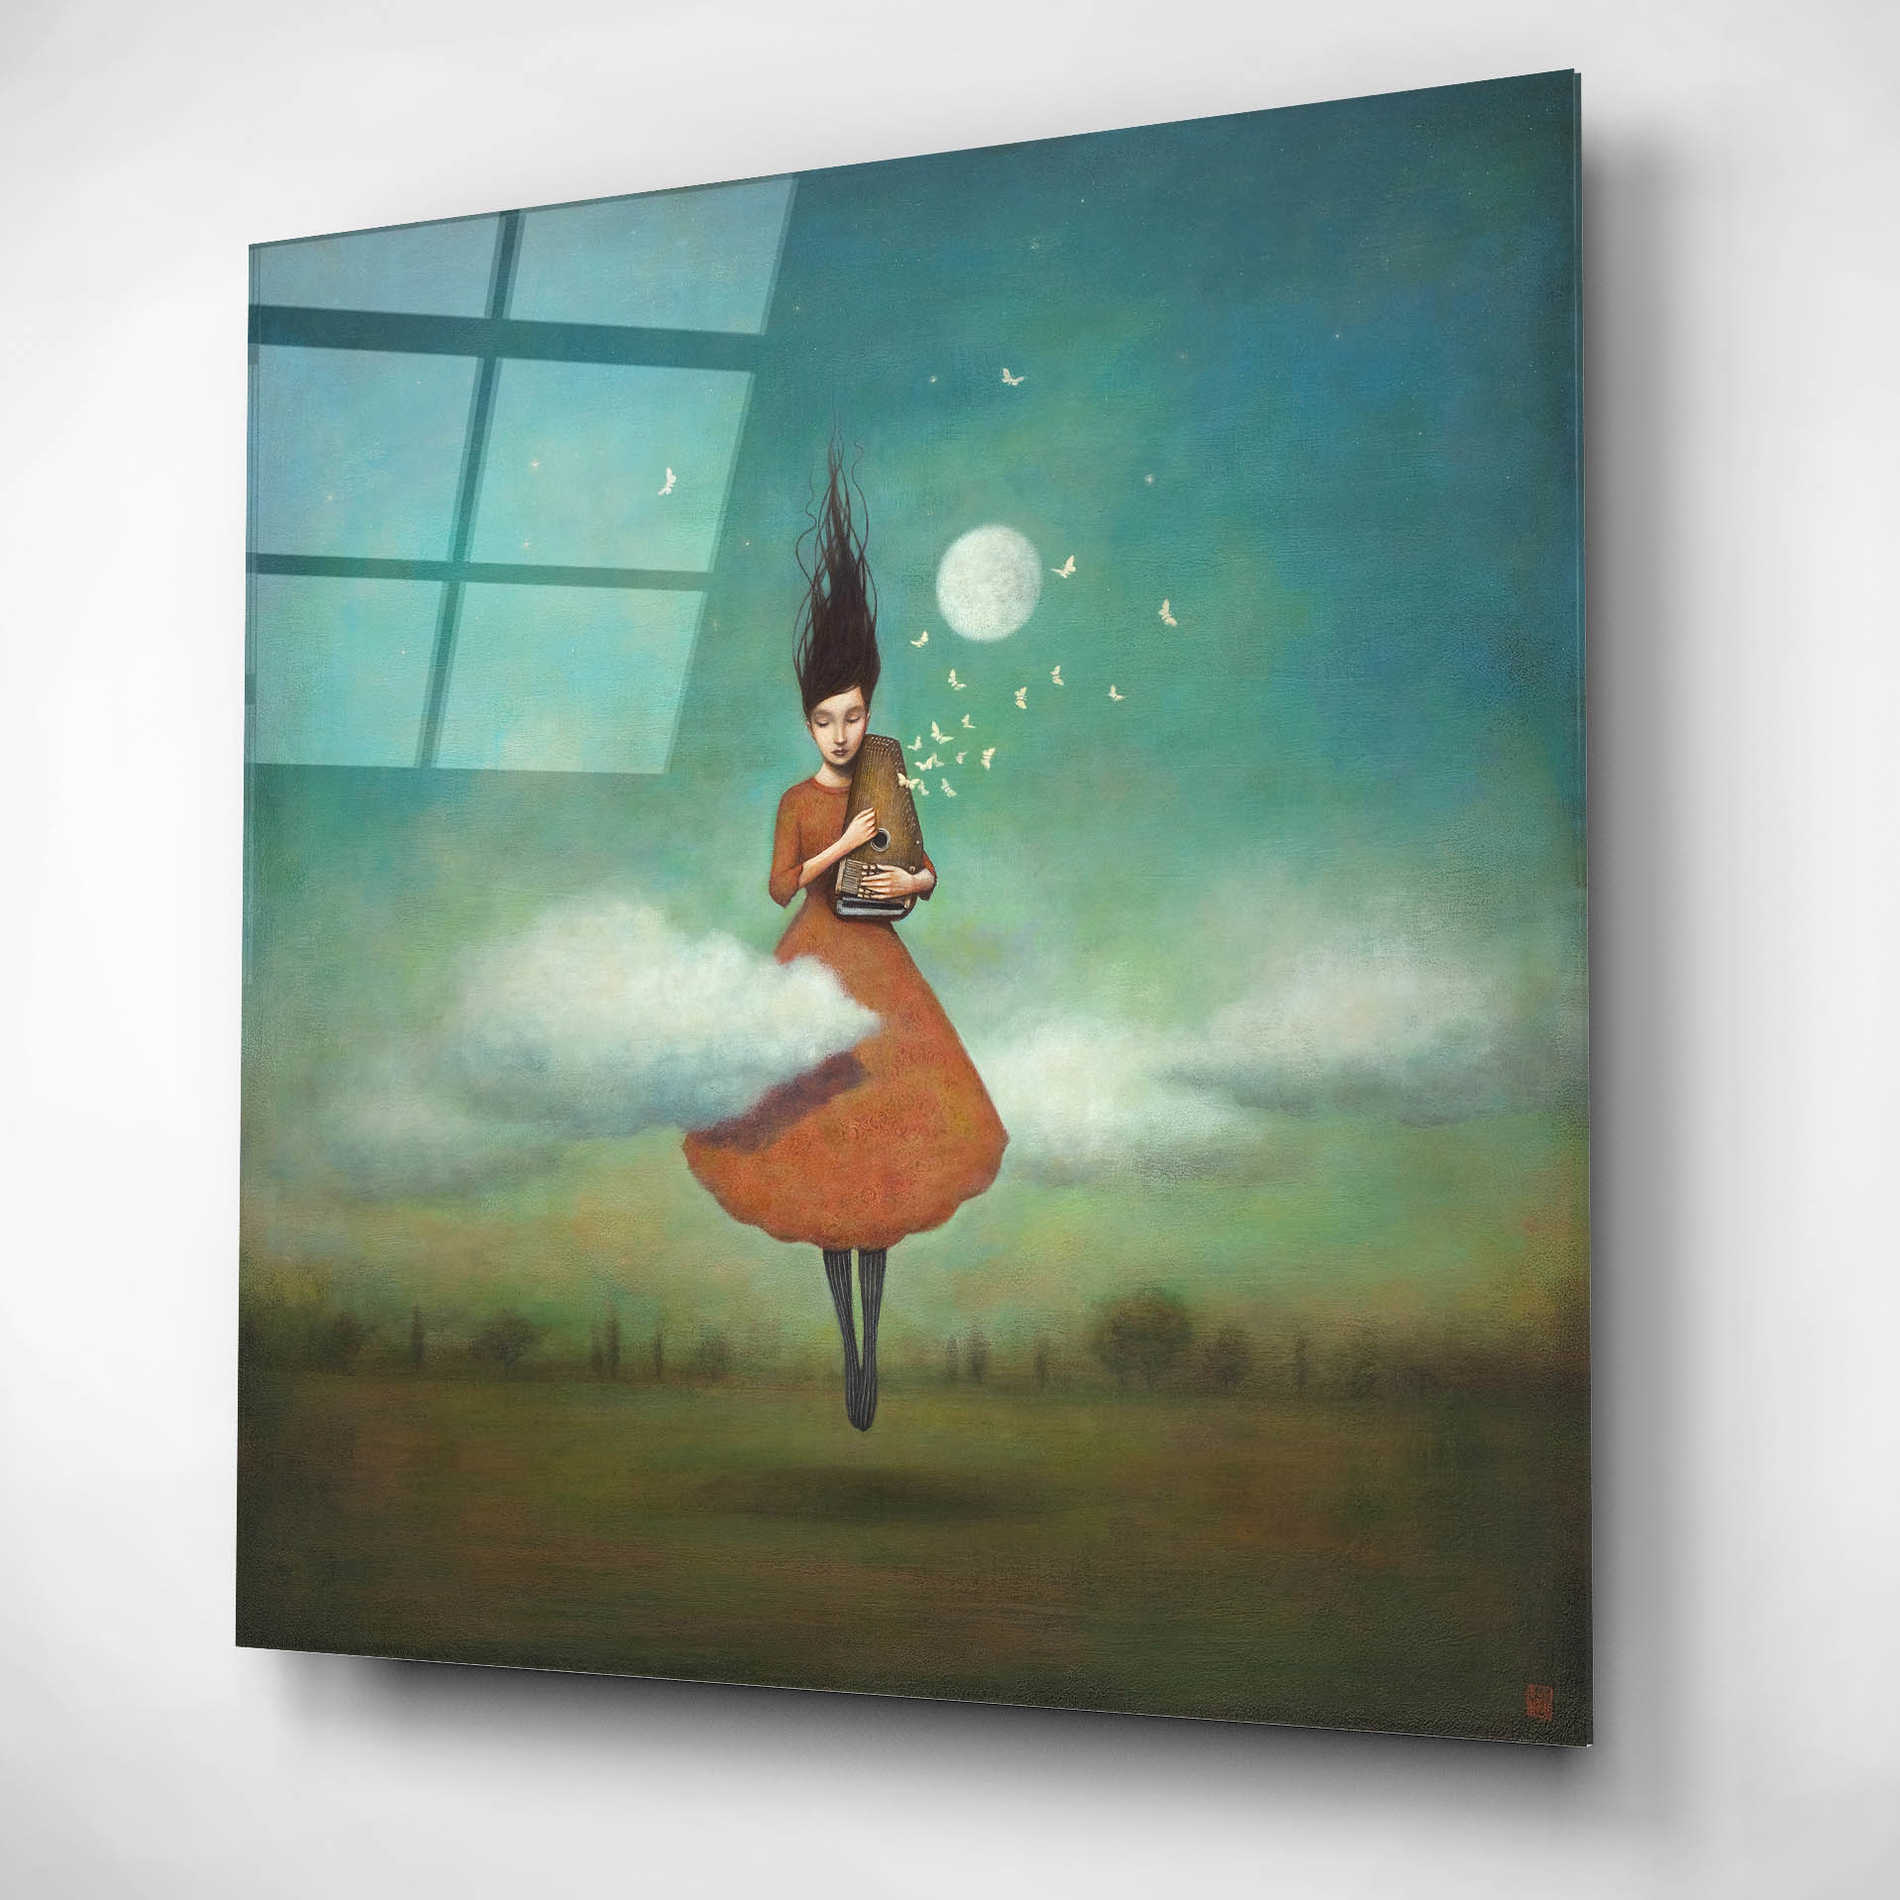 Epic Art 'High Notes for Low Clouds' by Duy Huynh, Acrylic Glass Wall Art,12x12